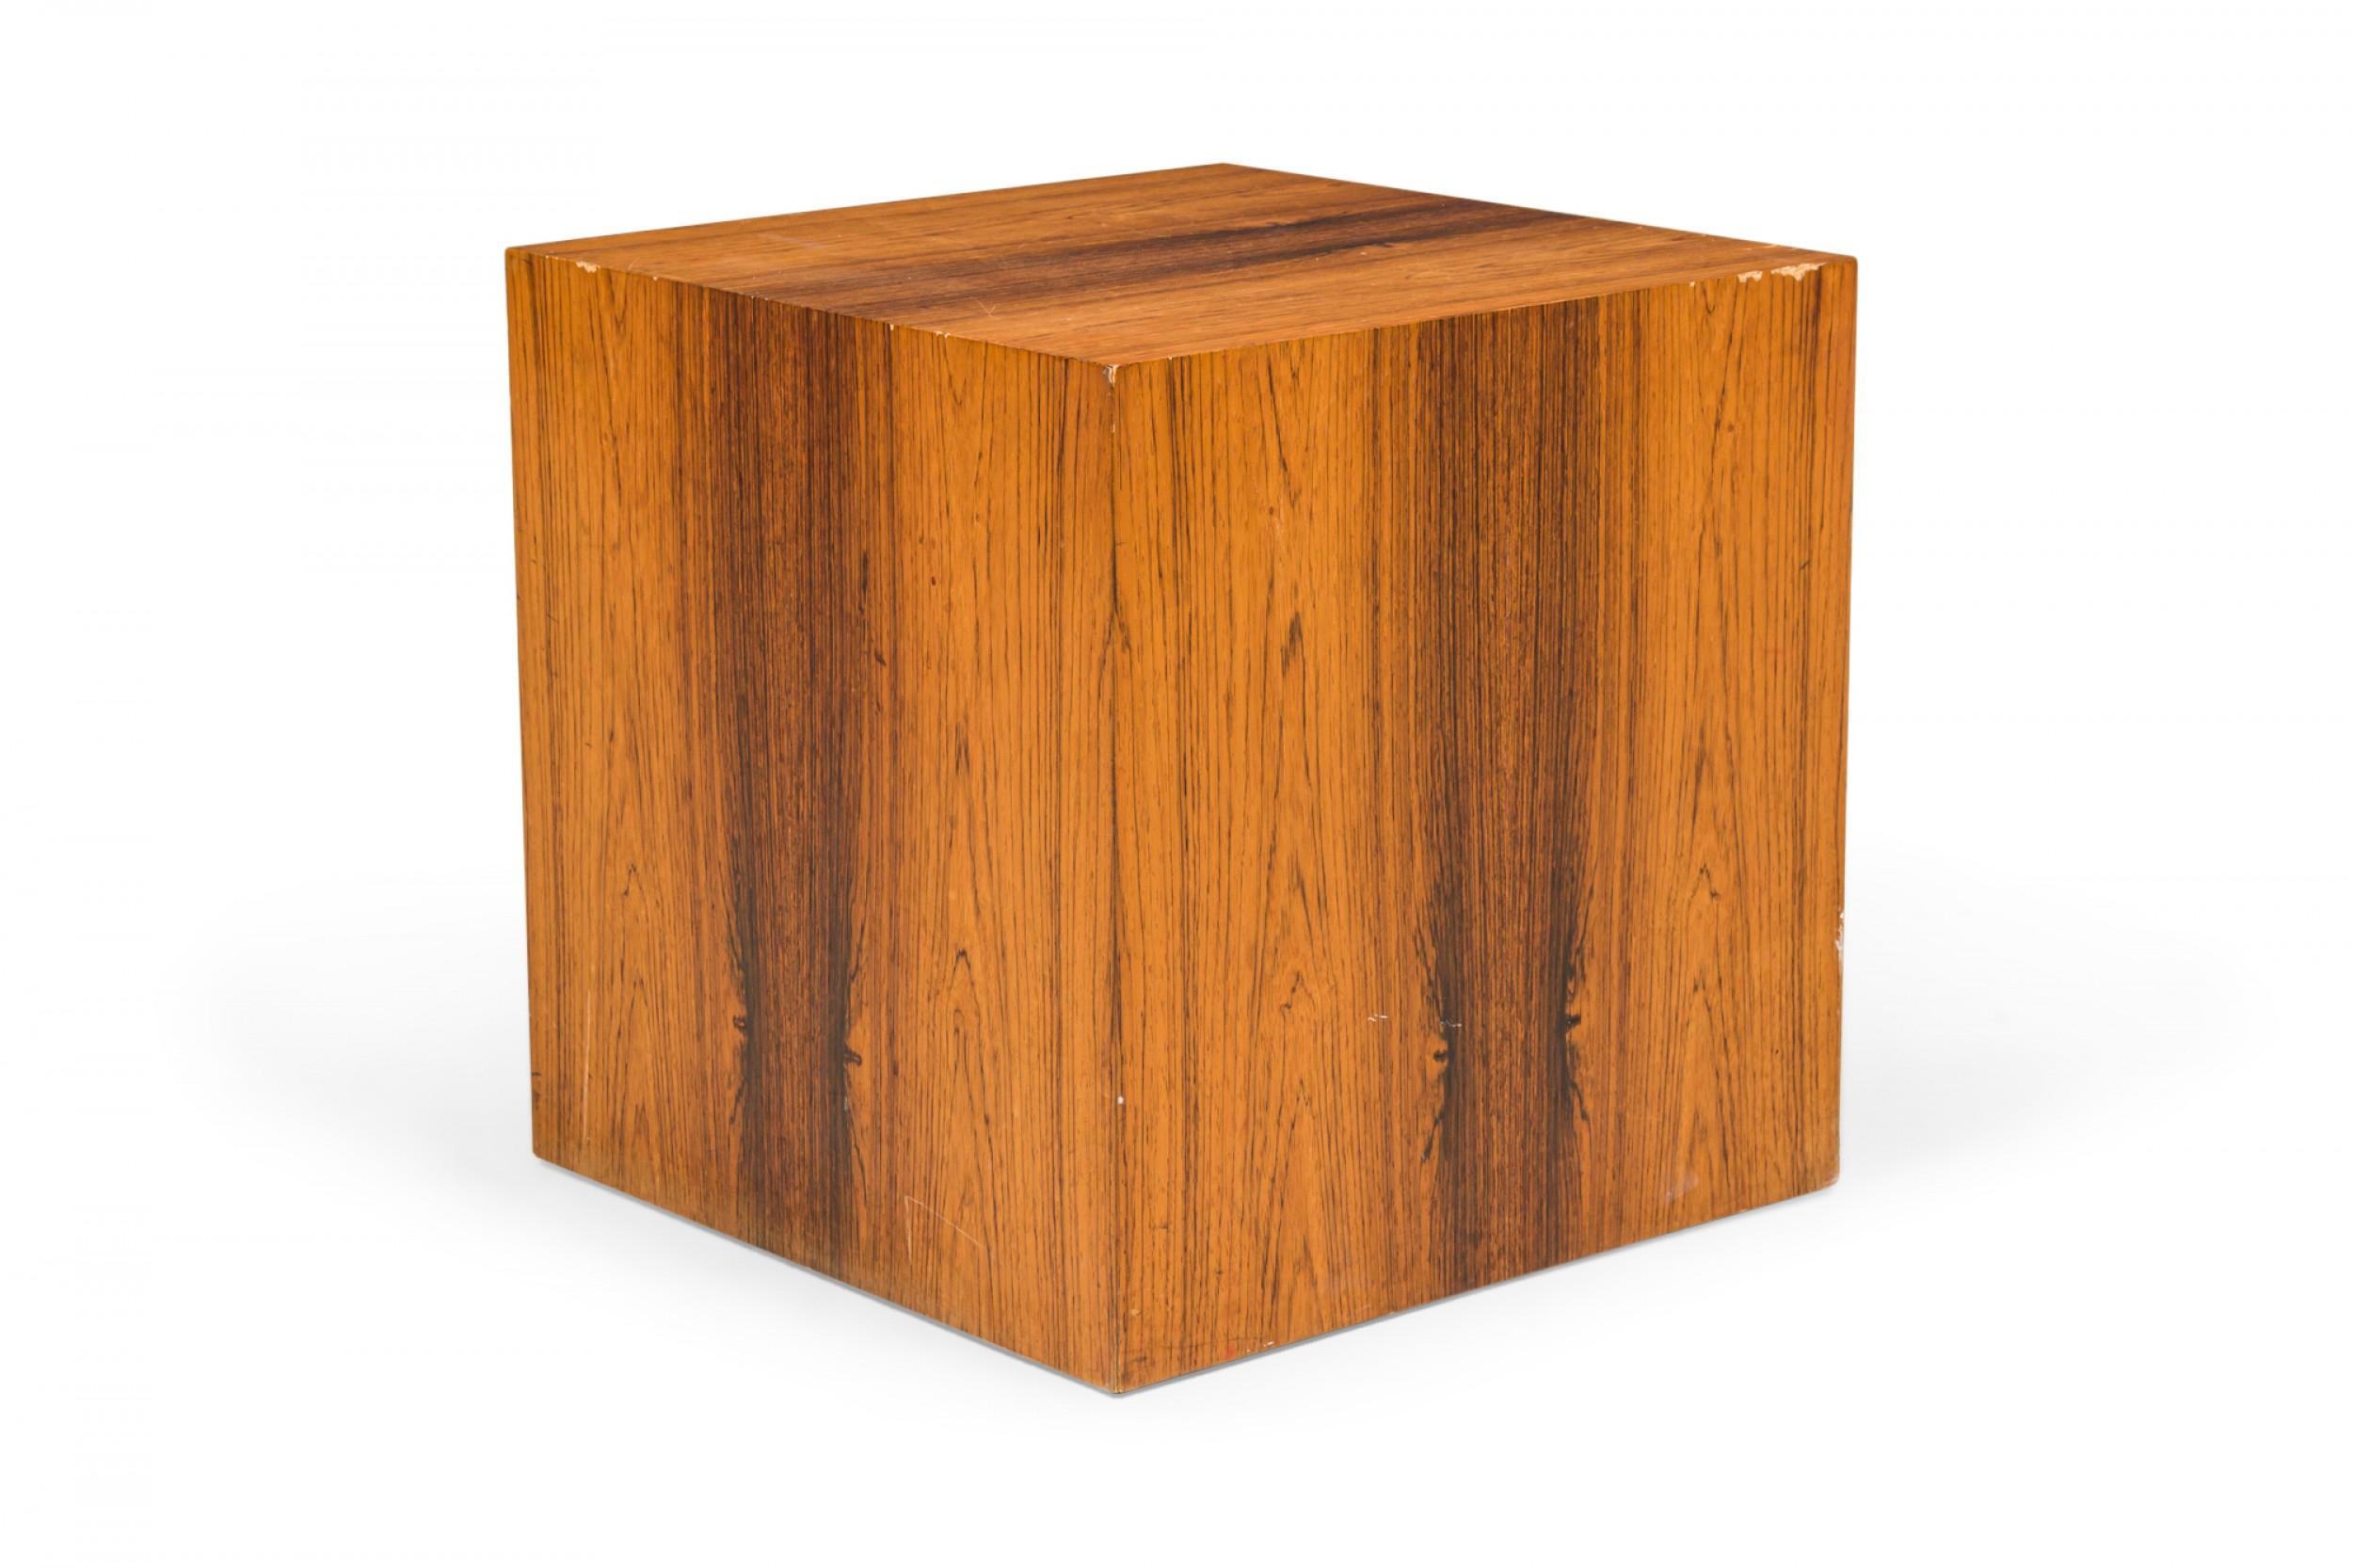 PAIR of American Mid-Century cube-shaped end / side tables with a rosewood veneer. (MILO BAUGHMAN FOR THAYER COGGIN)(PRICED AS PAIR)